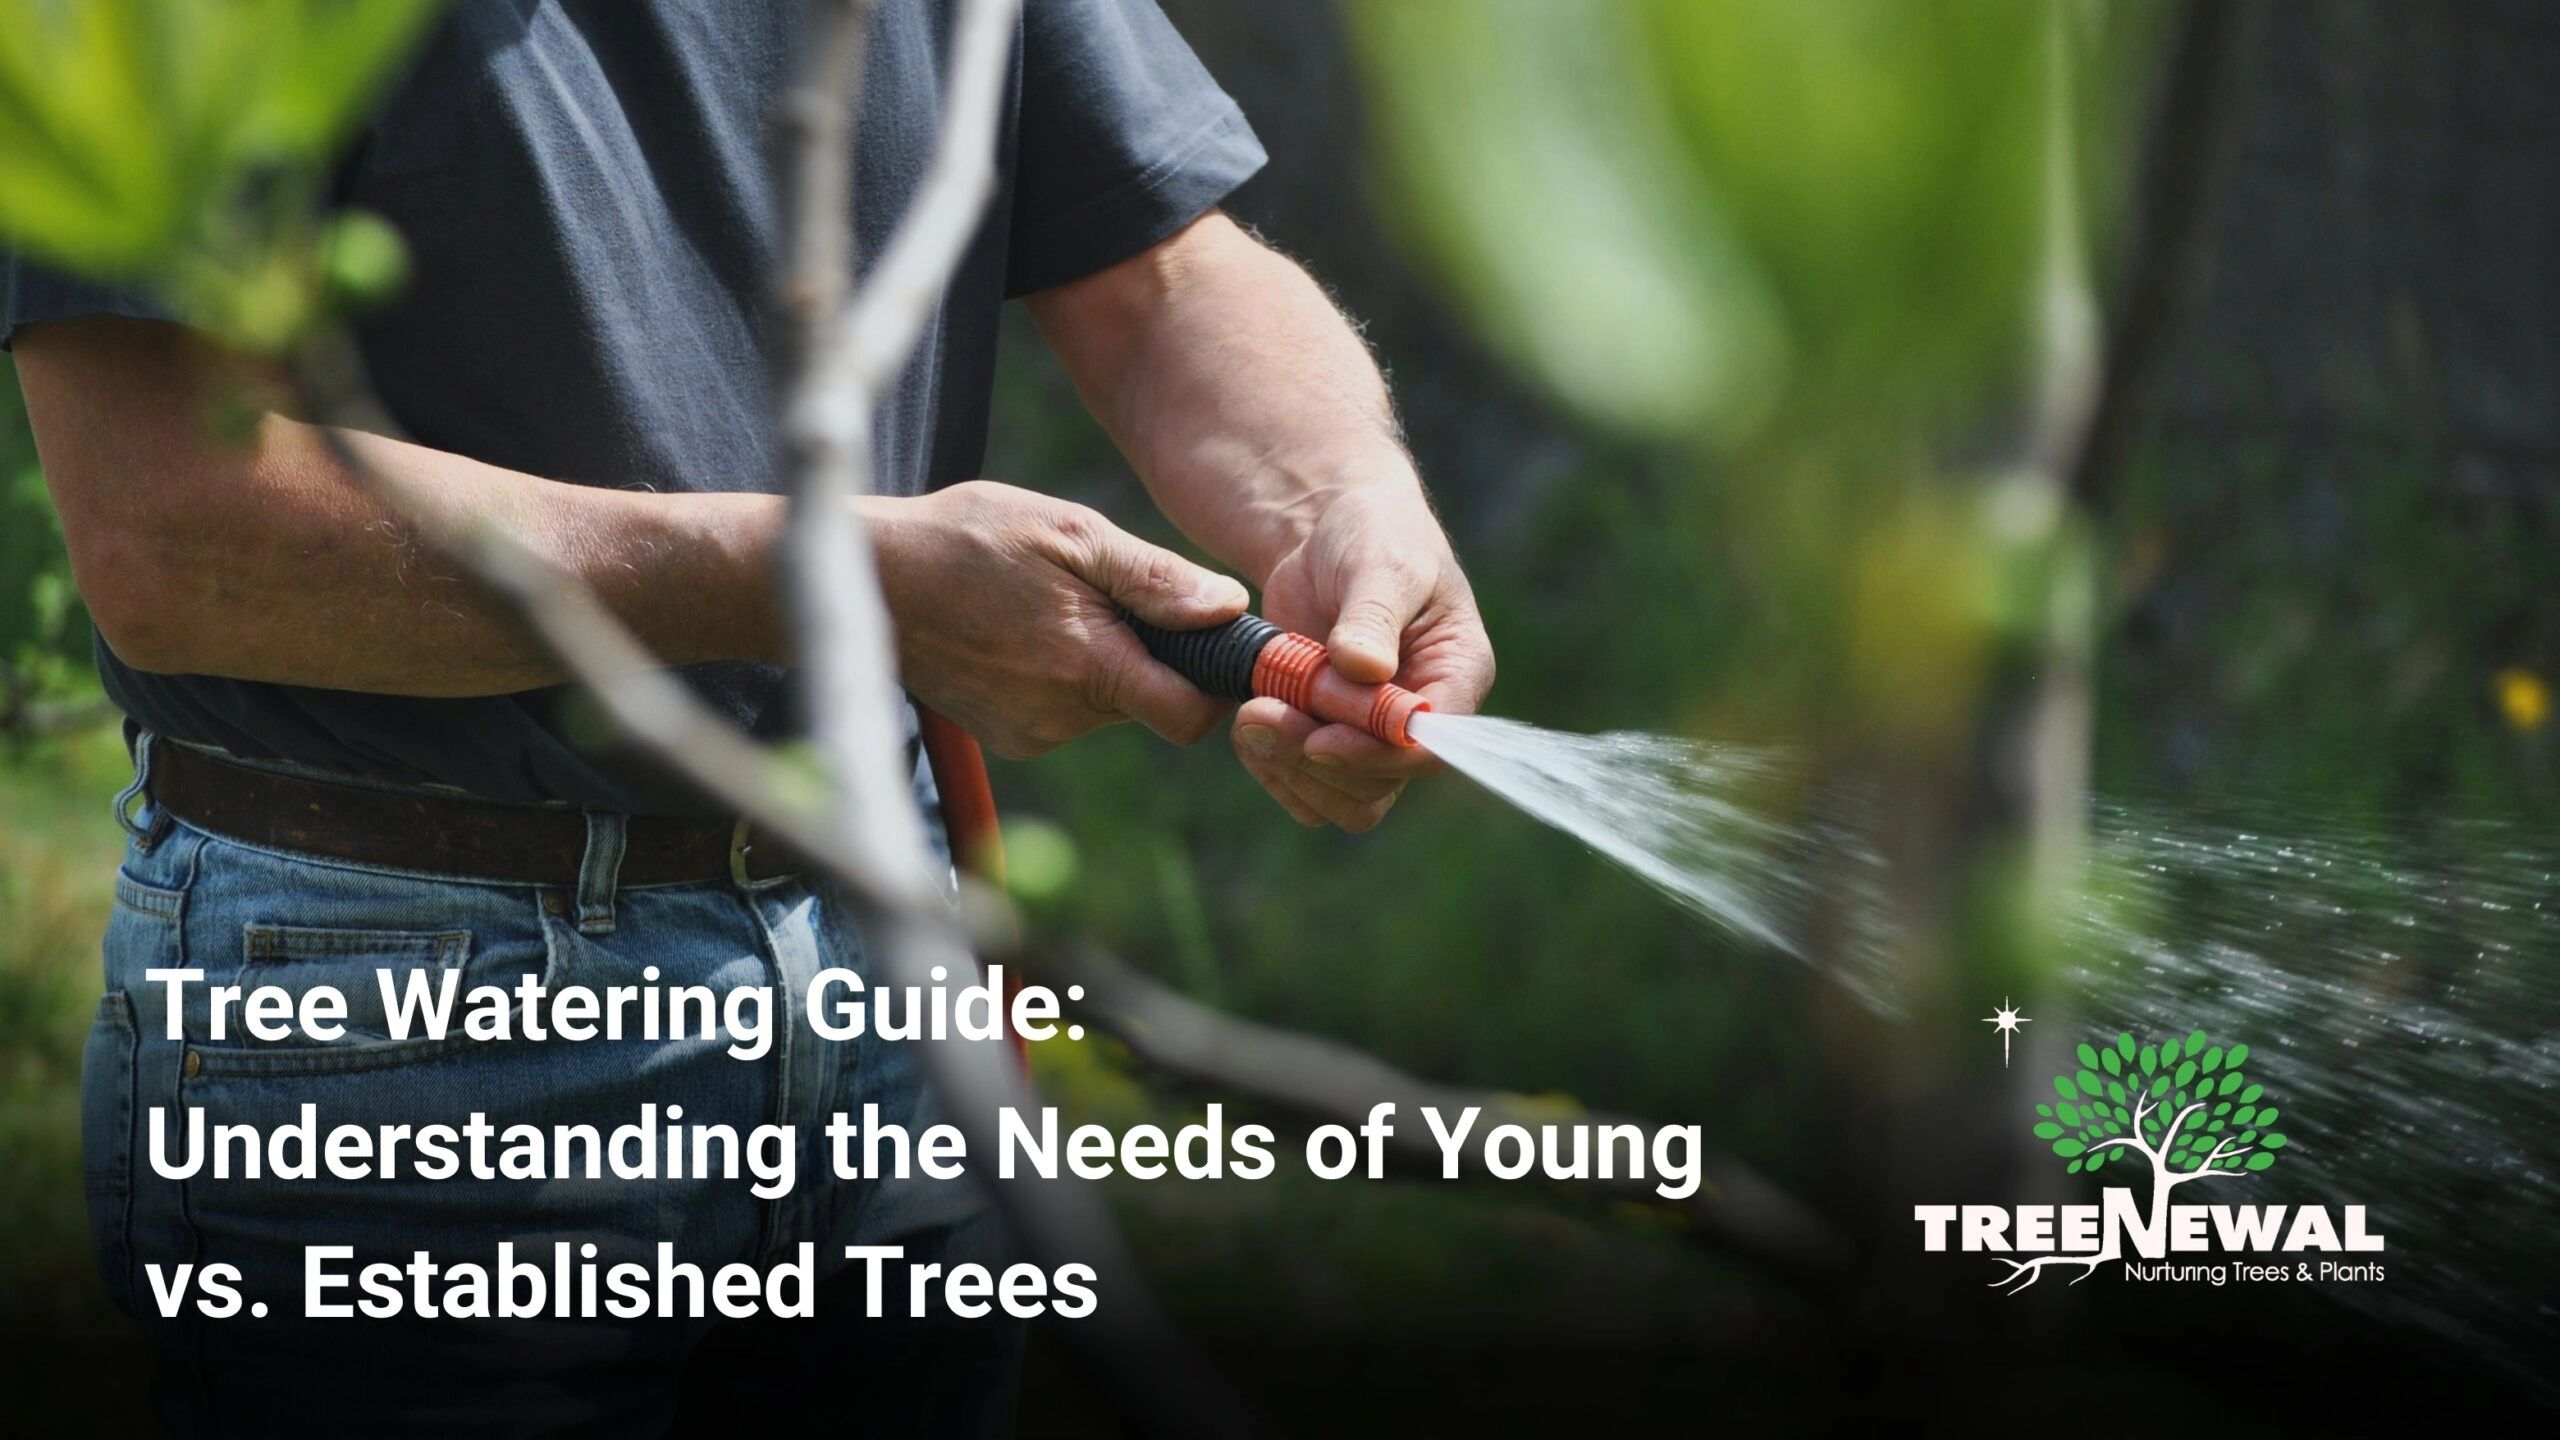 Tree Watering Guide: Understanding the Needs of Young vs. Established Trees